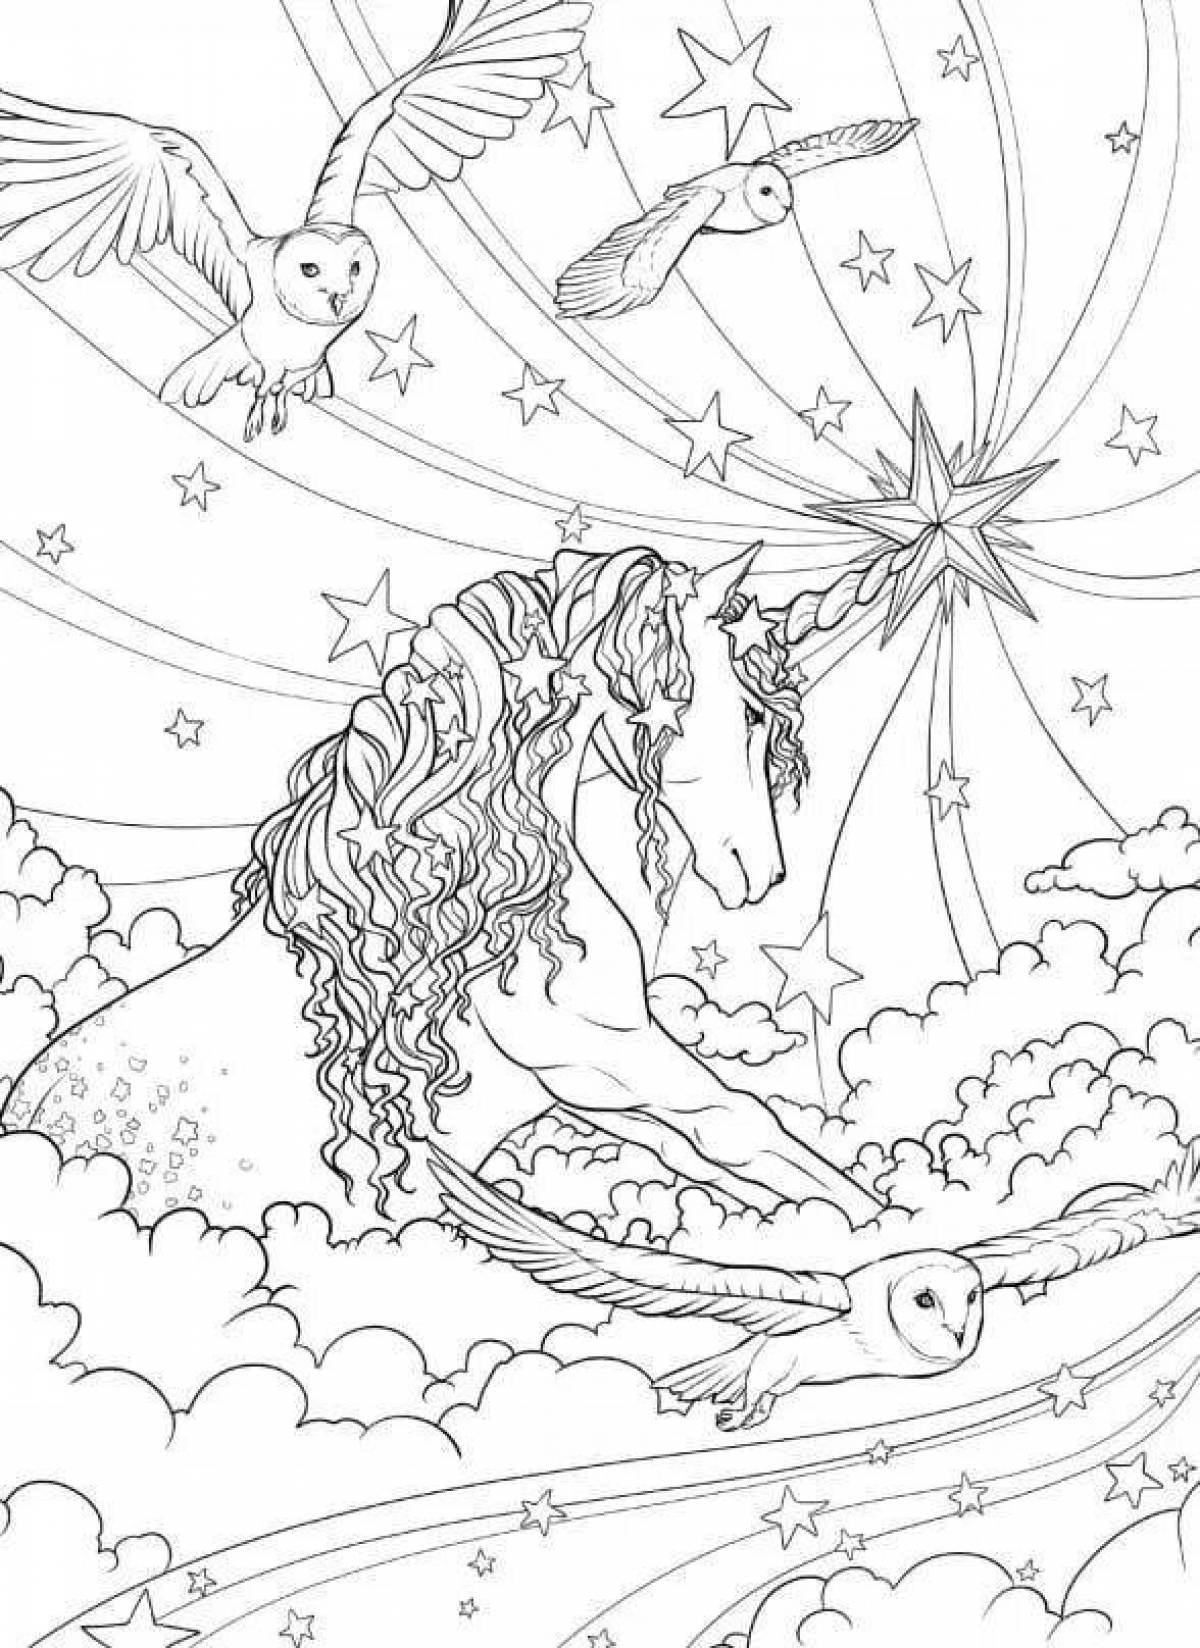 Amazing coloring page magic page